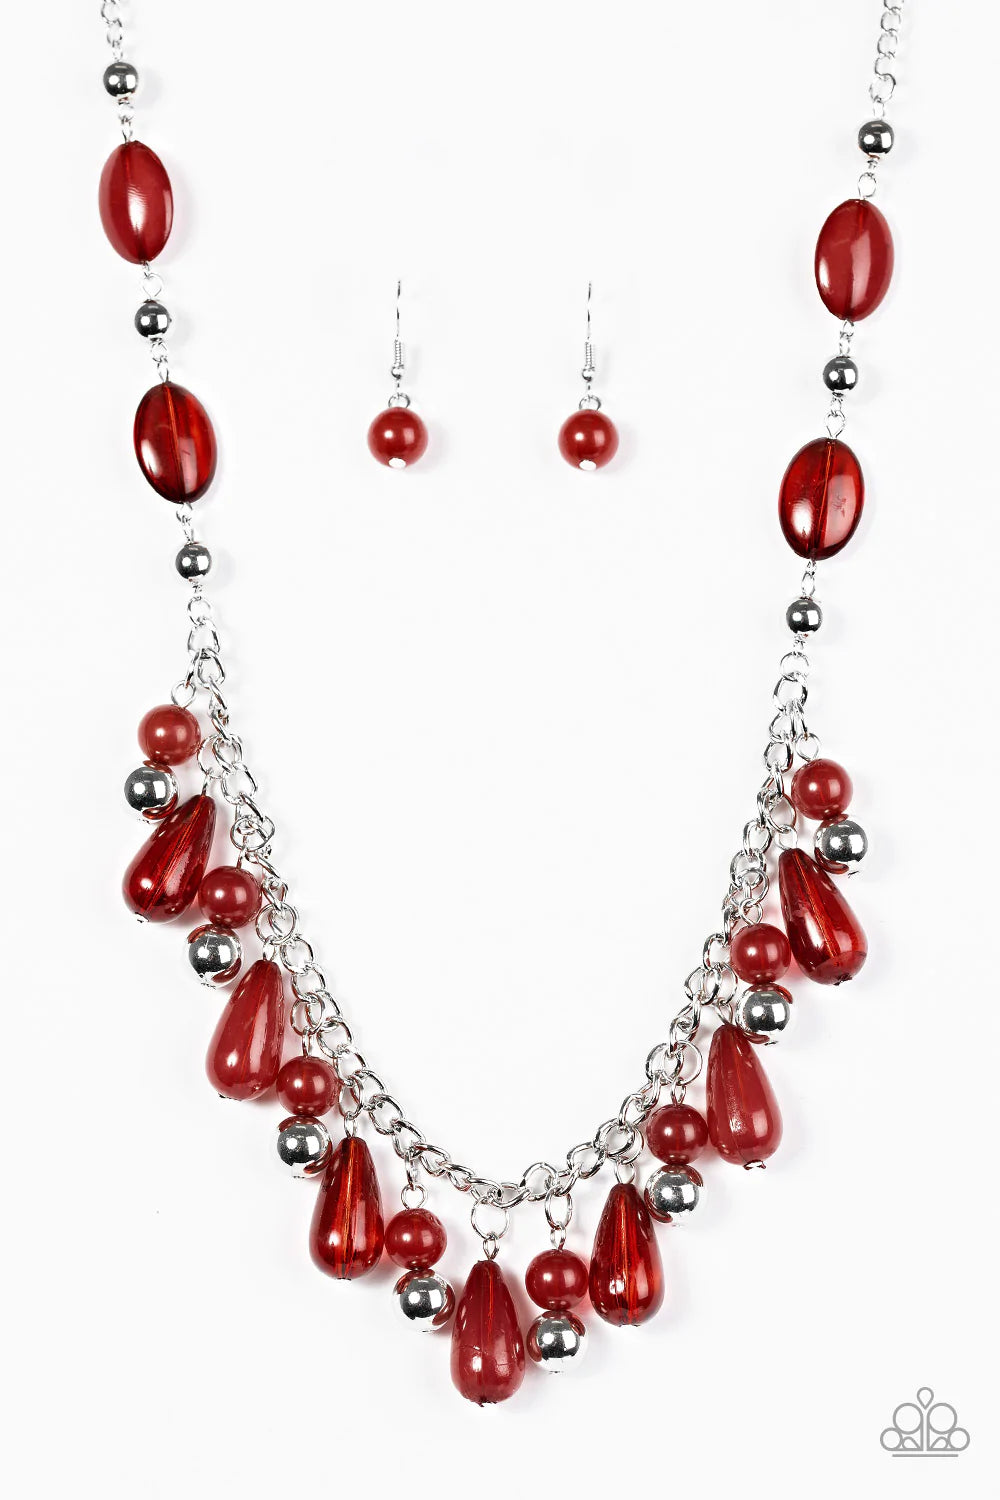 Paparazzi Necklace ~ HUEs She? - Red